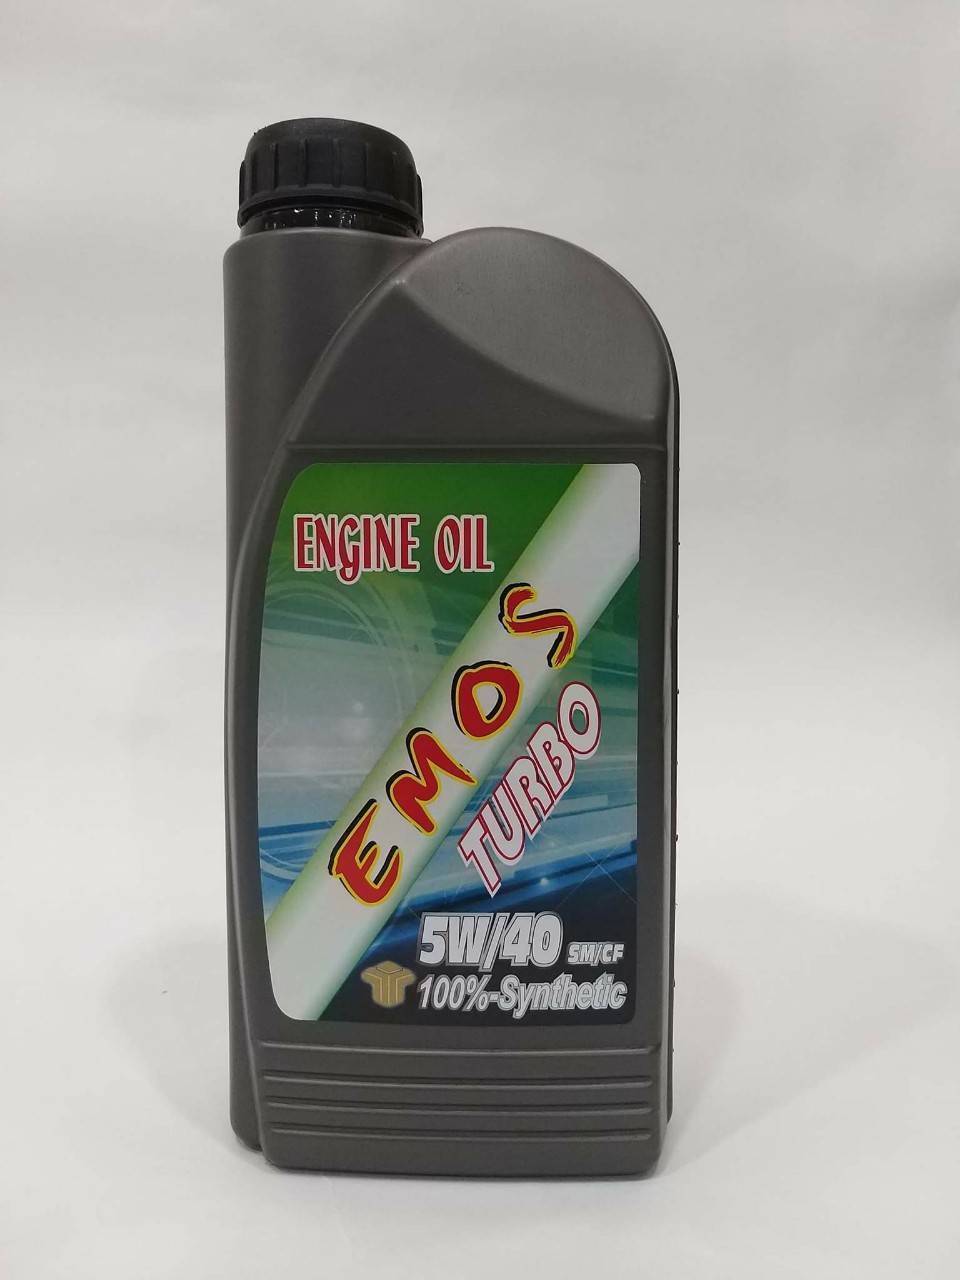 SM 5W/40 100% fully synthetic engine oil